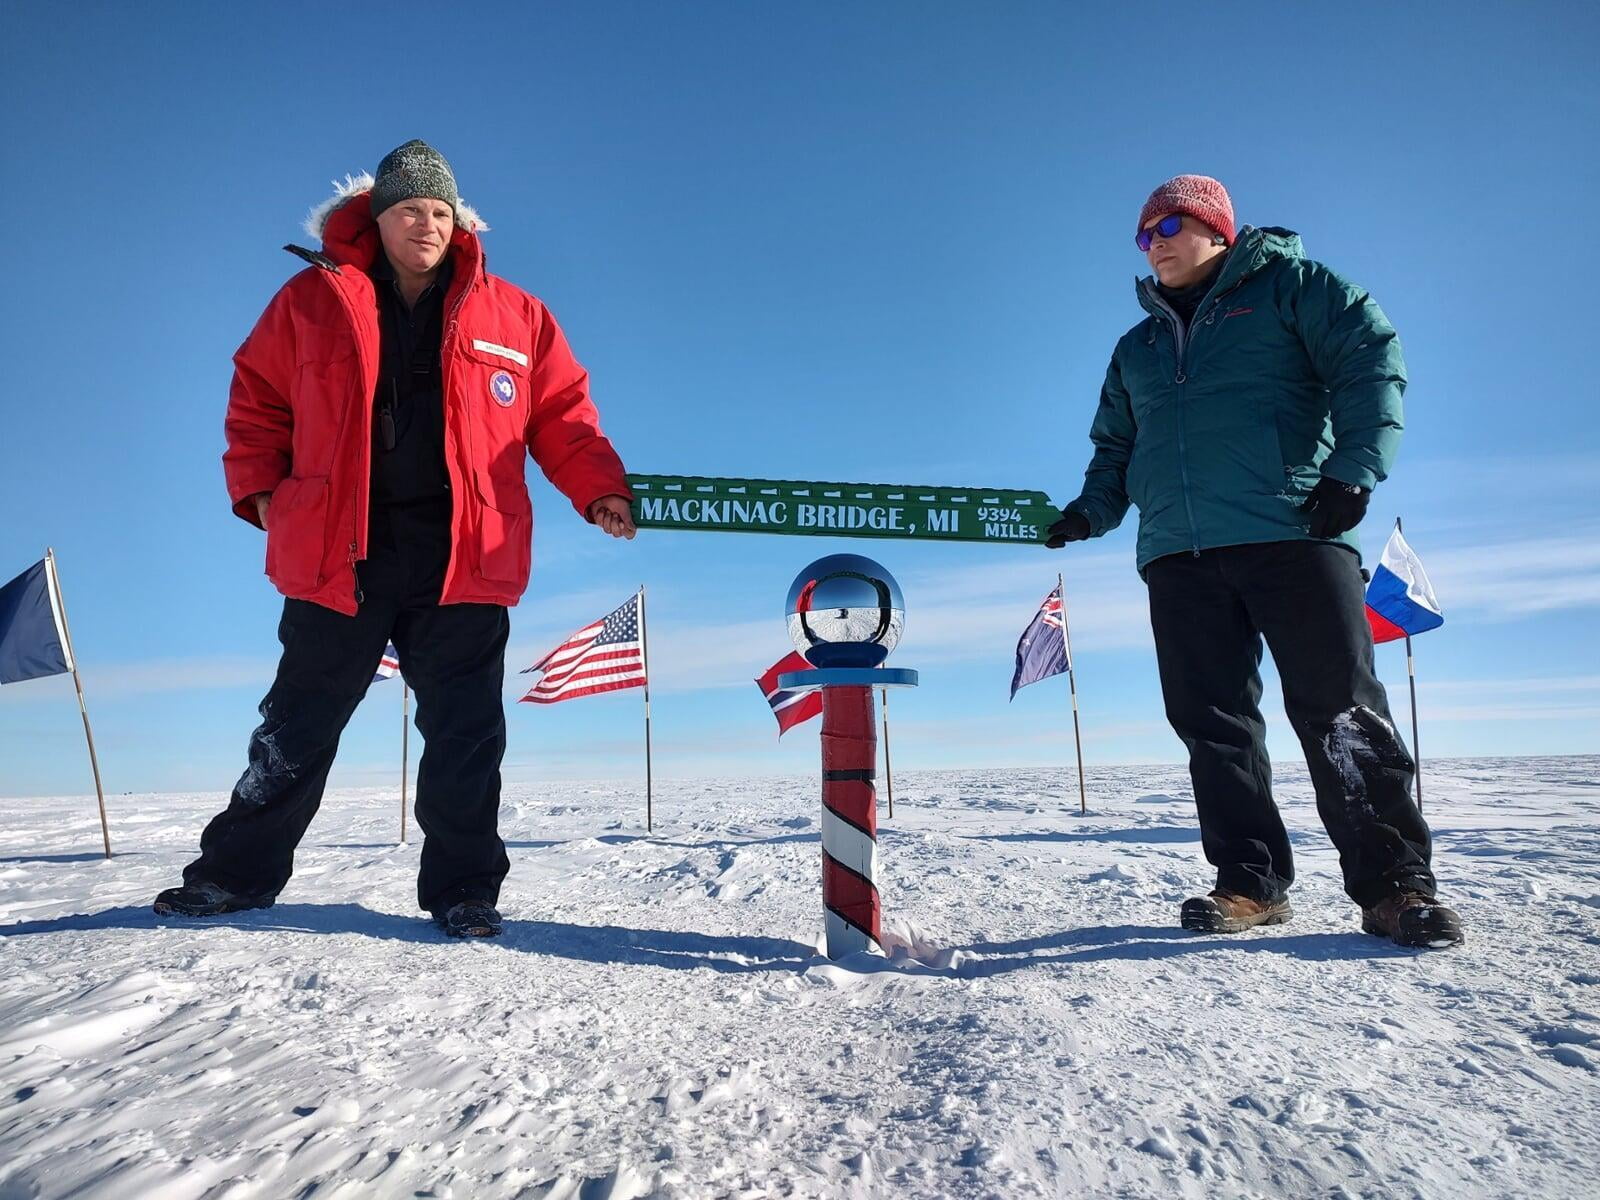 Piece Of Mackinac Bridge Found Home In South Pole For Holidays